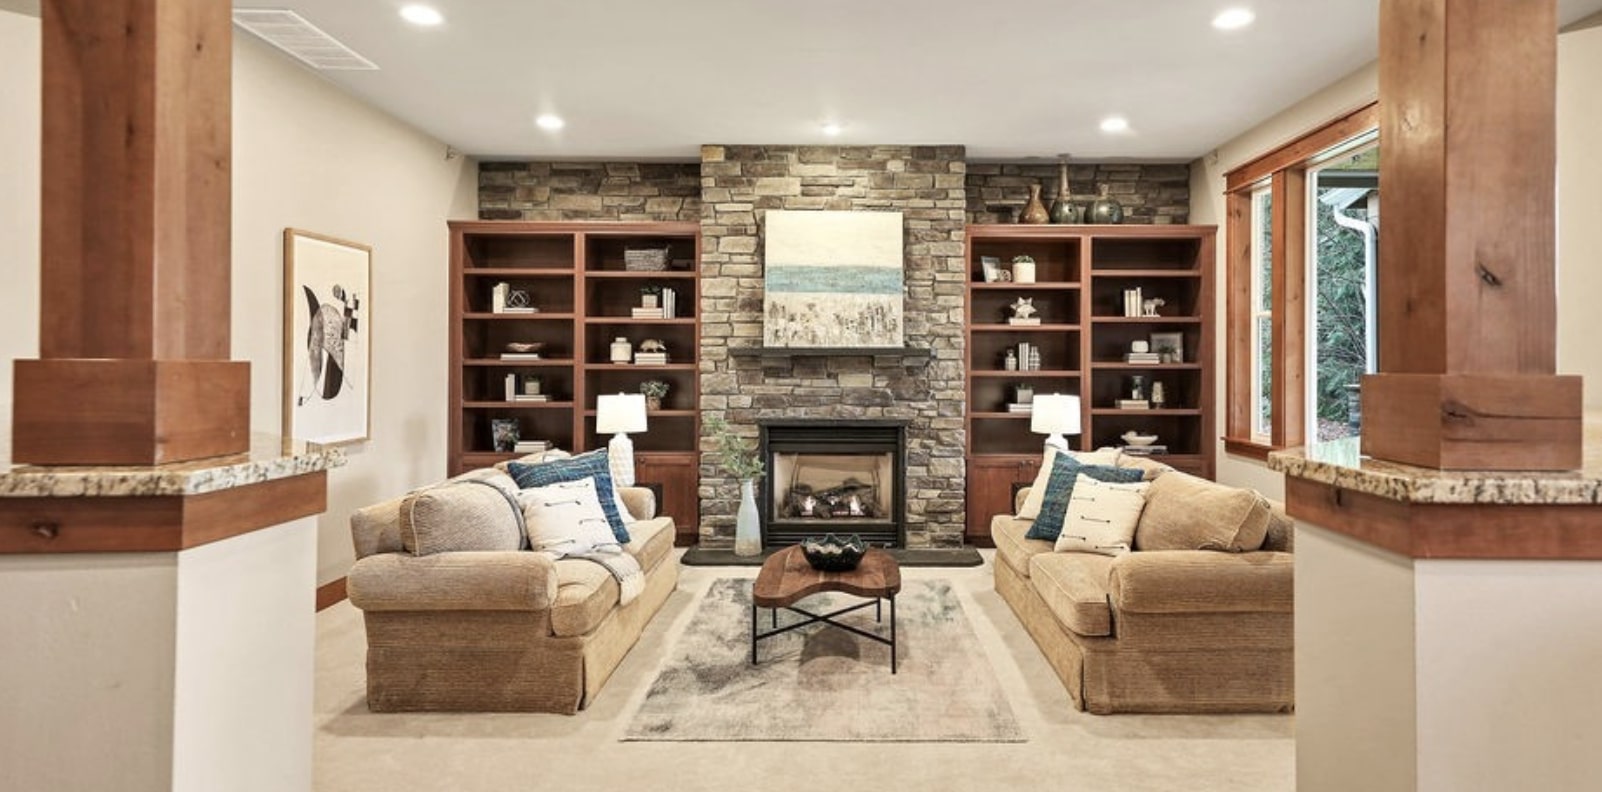 The cozy great room features a cozy fireside seating arrangement